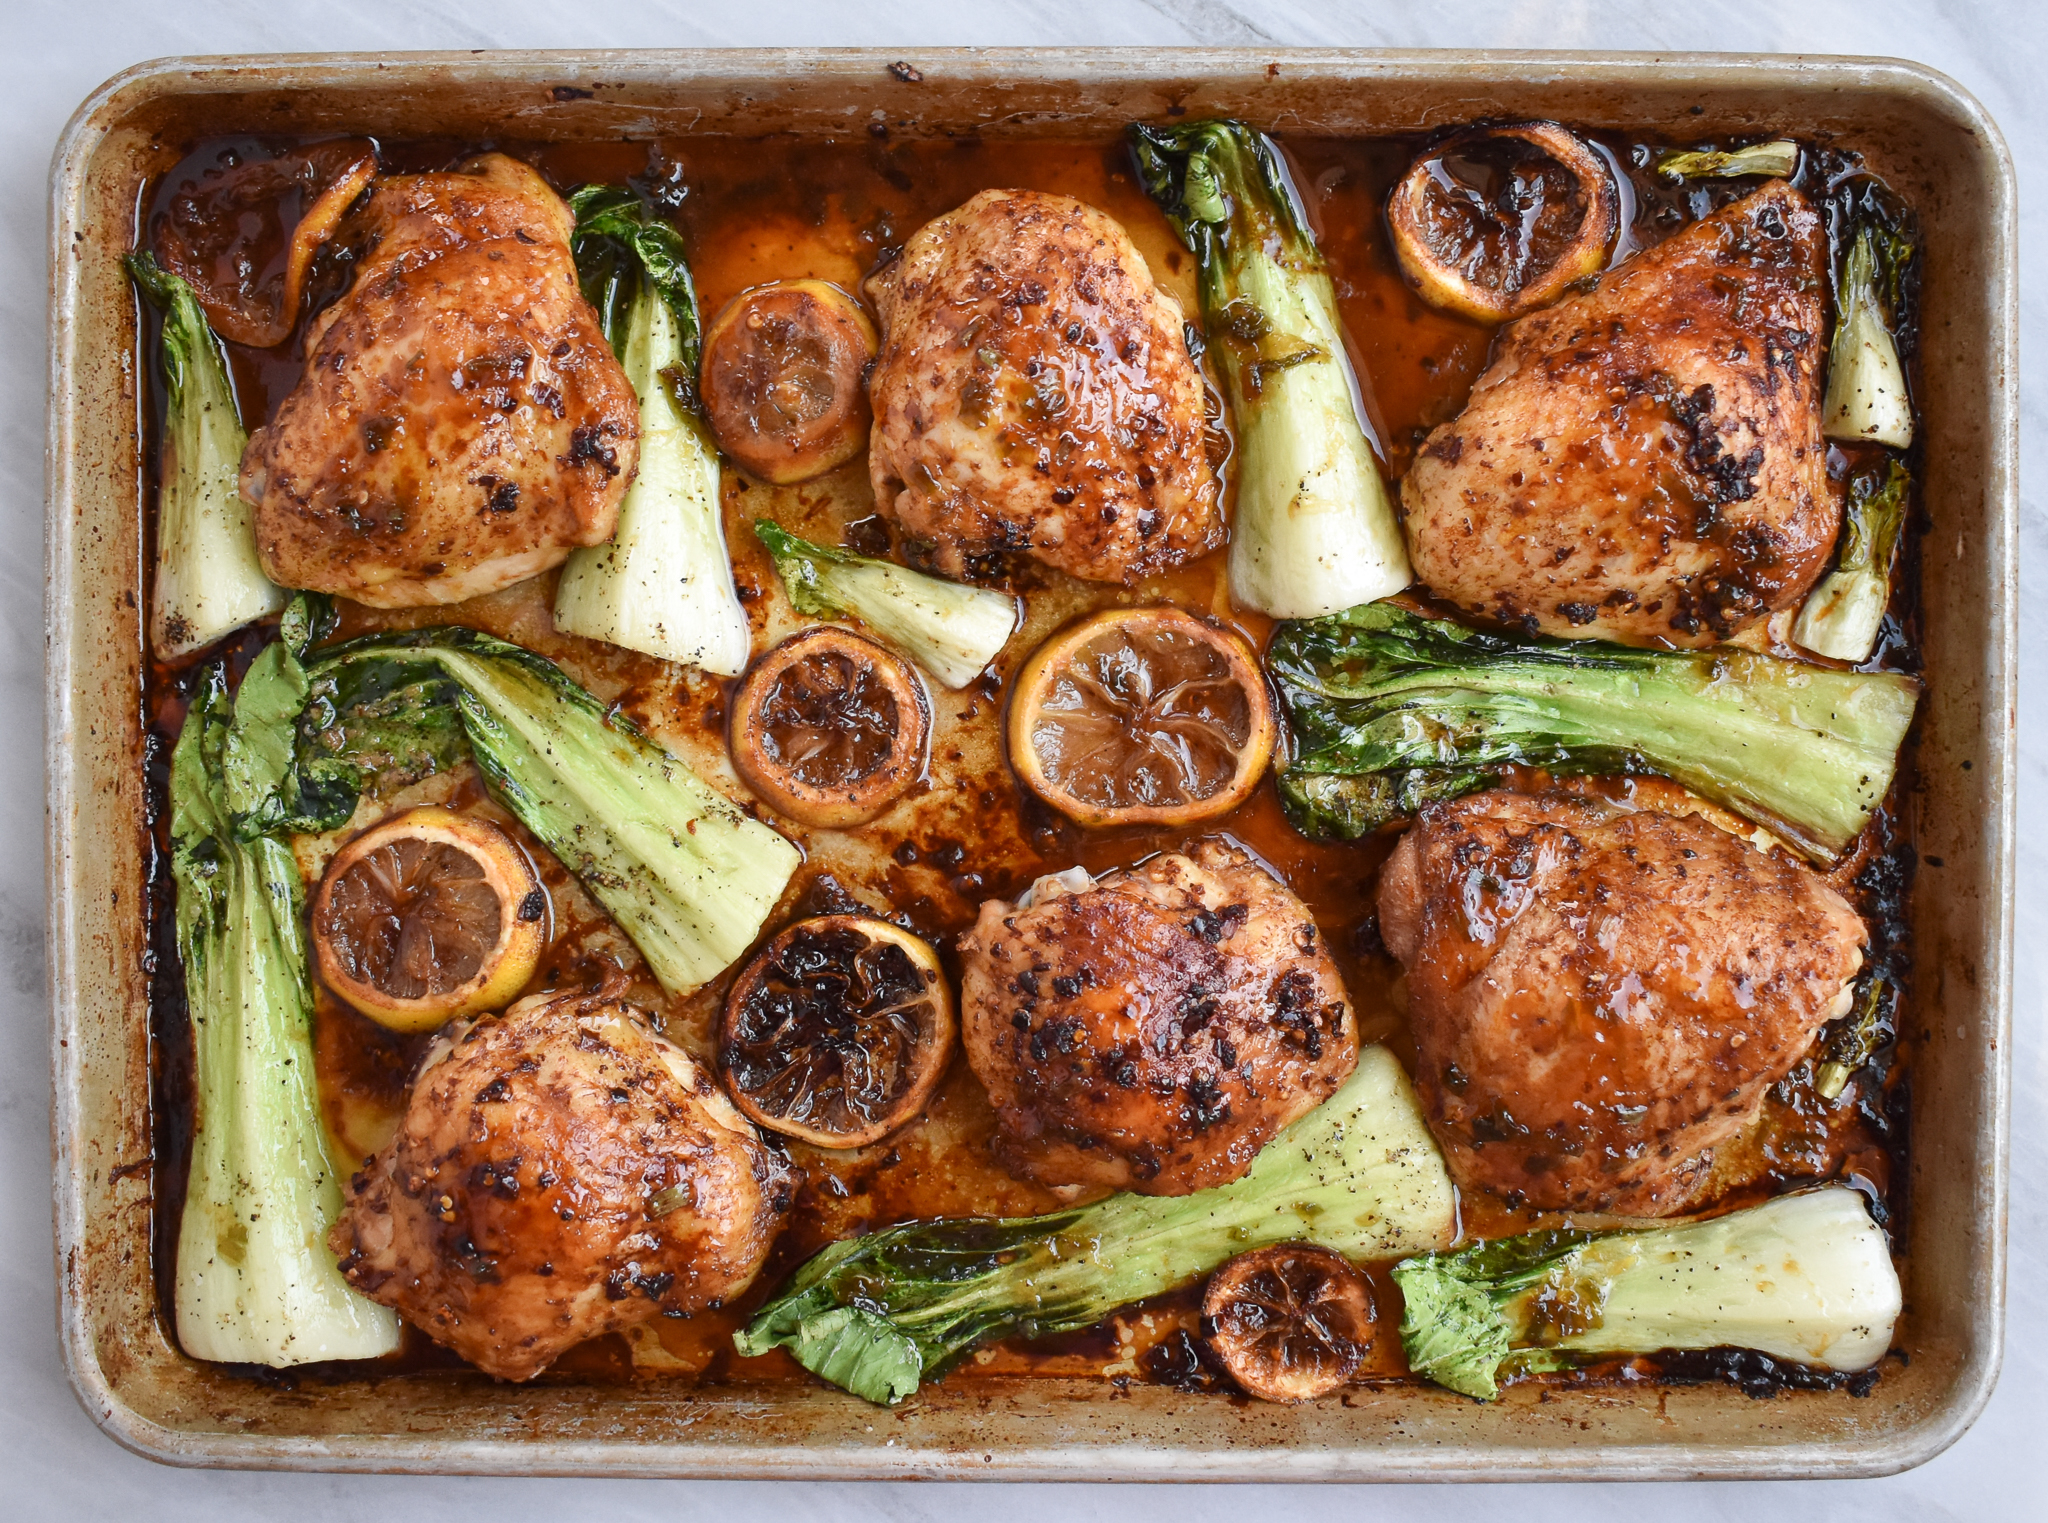 Healthy Cooking Essentials: In Praise of Rimmed Baking Sheets